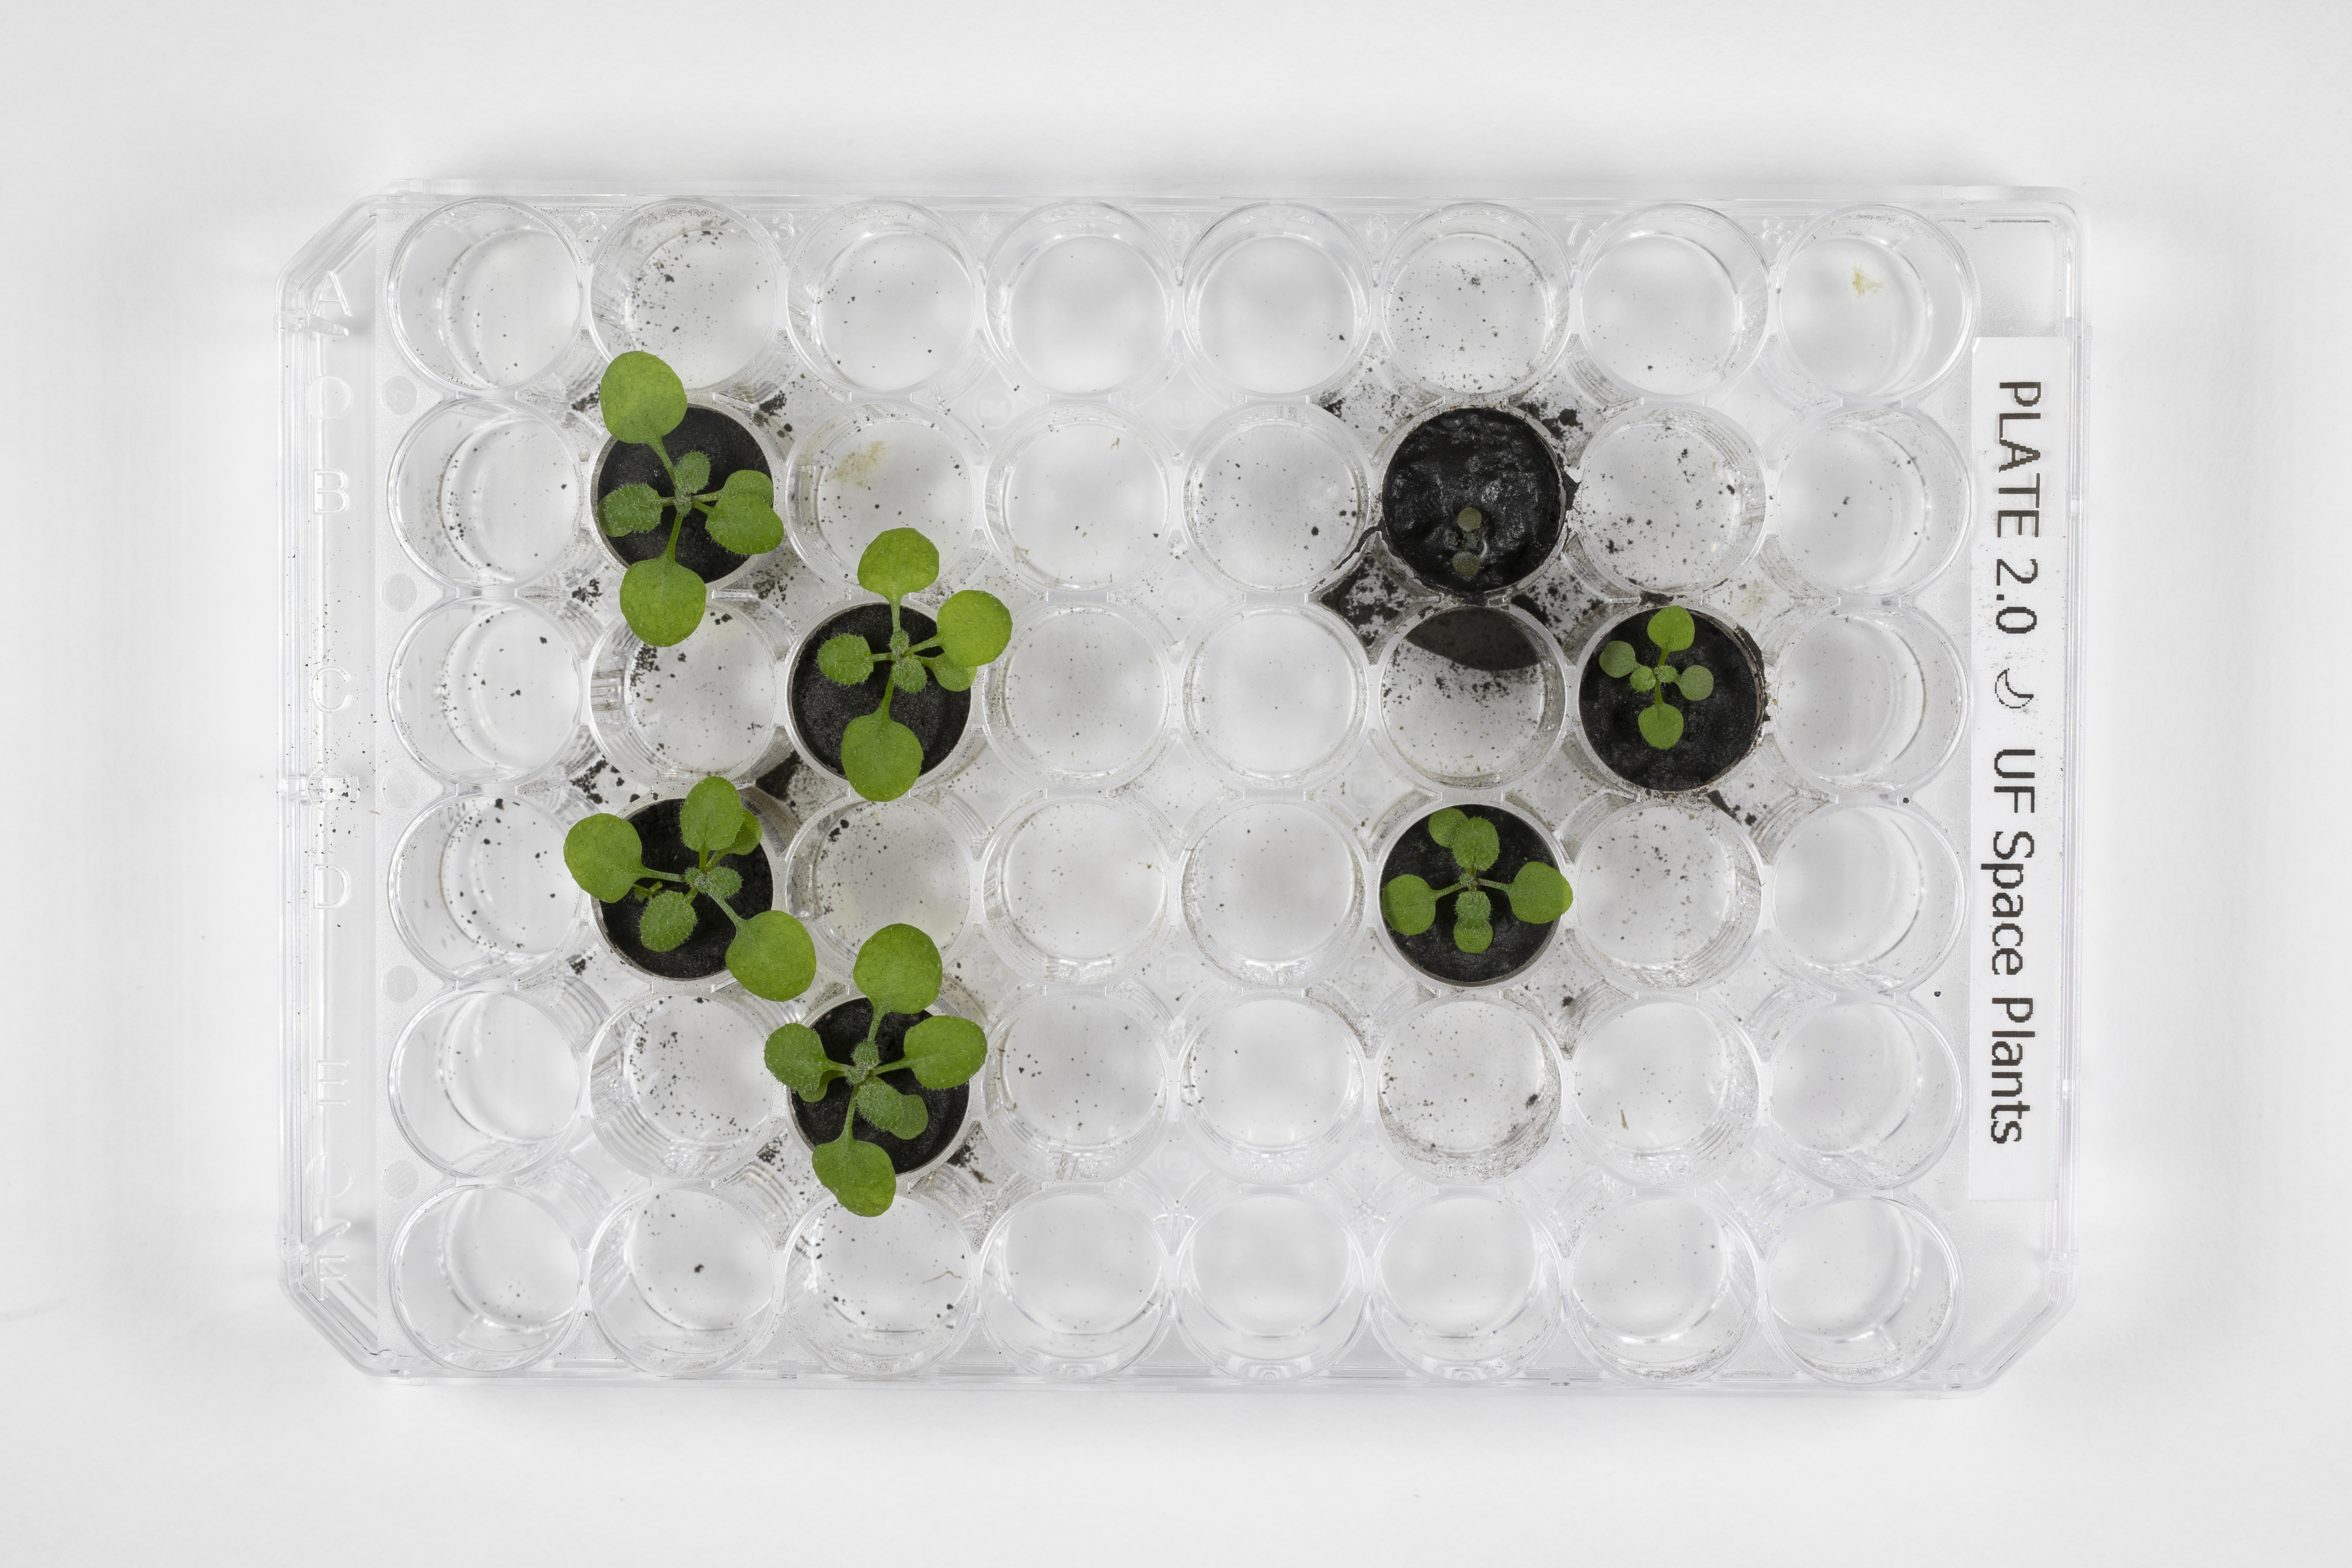 Looking directly down on clear tray of tubes. In the middle-left are four staggered dark circles, each containing a small, green-leafed seedling. In the middle right are three similar dark circles.